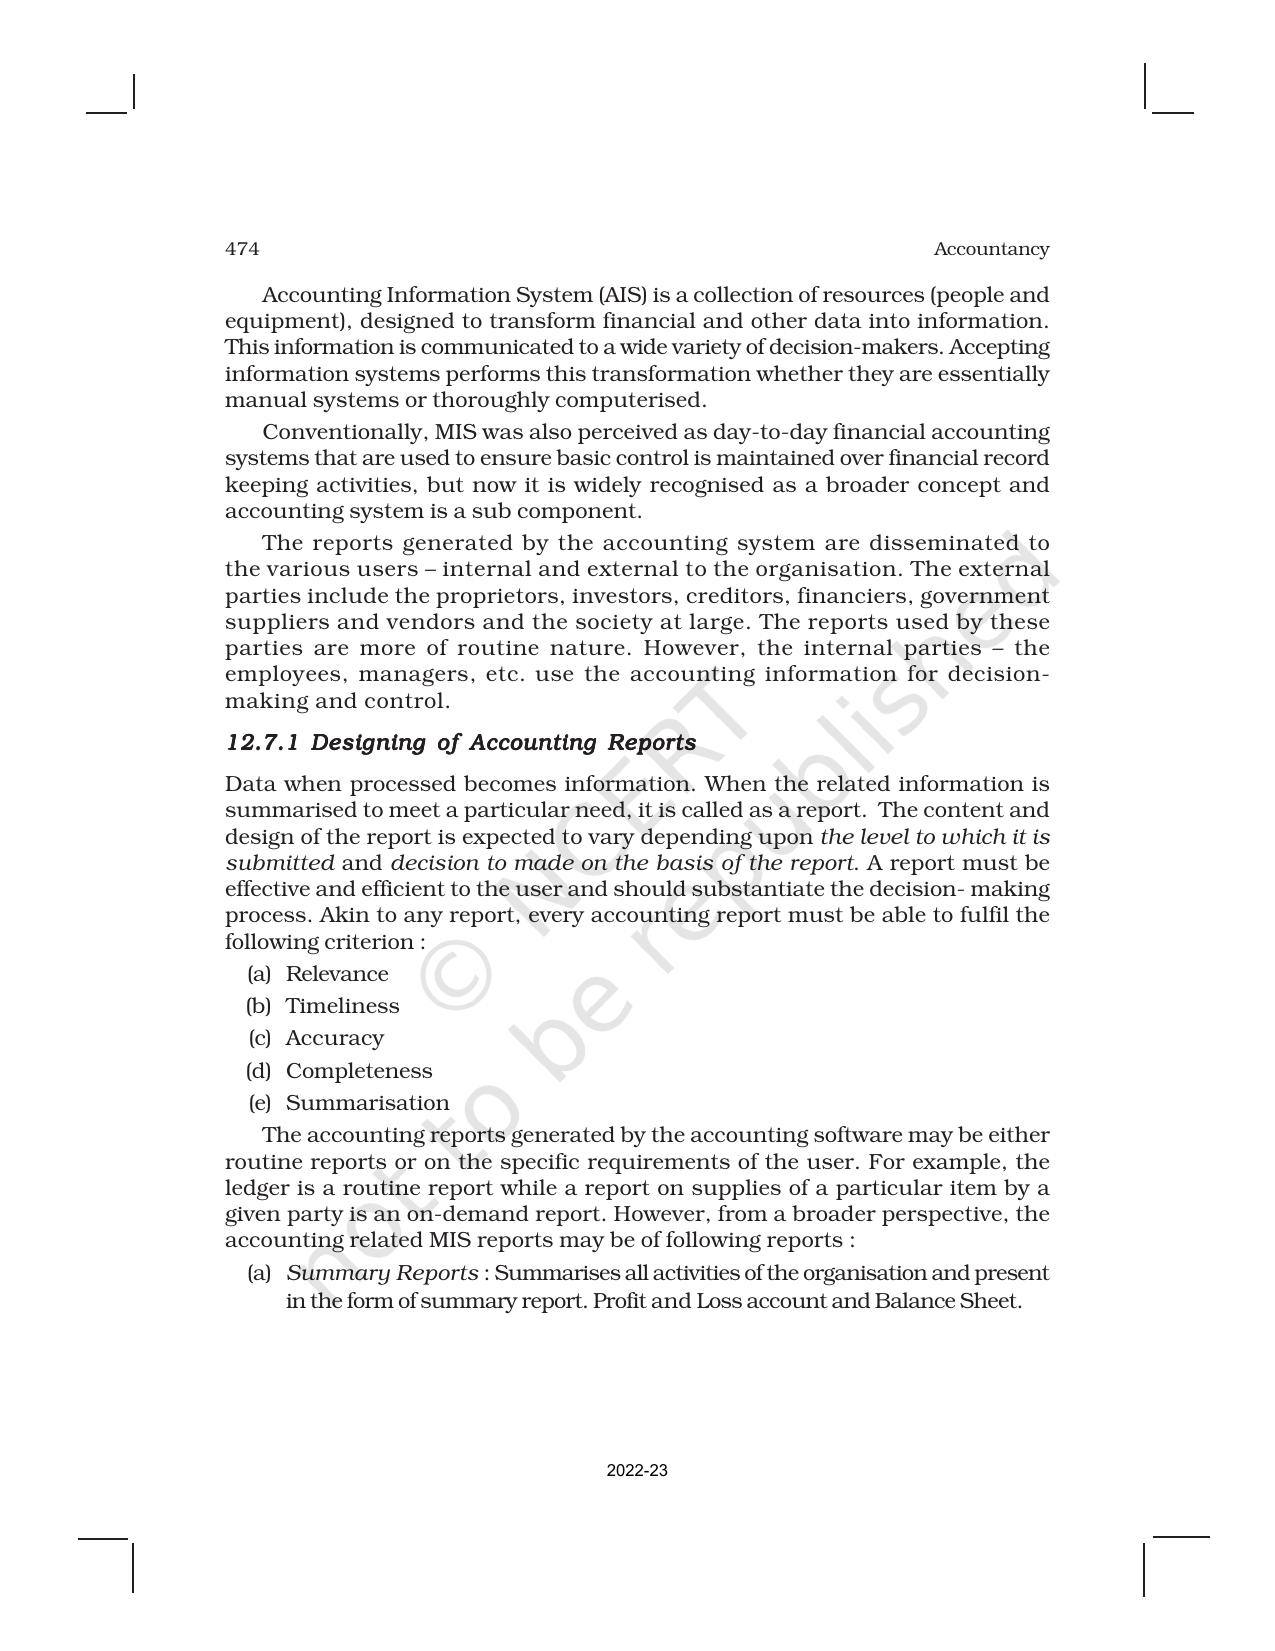 NCERT Book for Class 11 Accountancy (Part-II) Chapter 12 Applications of Computers in Accounting - Page 12